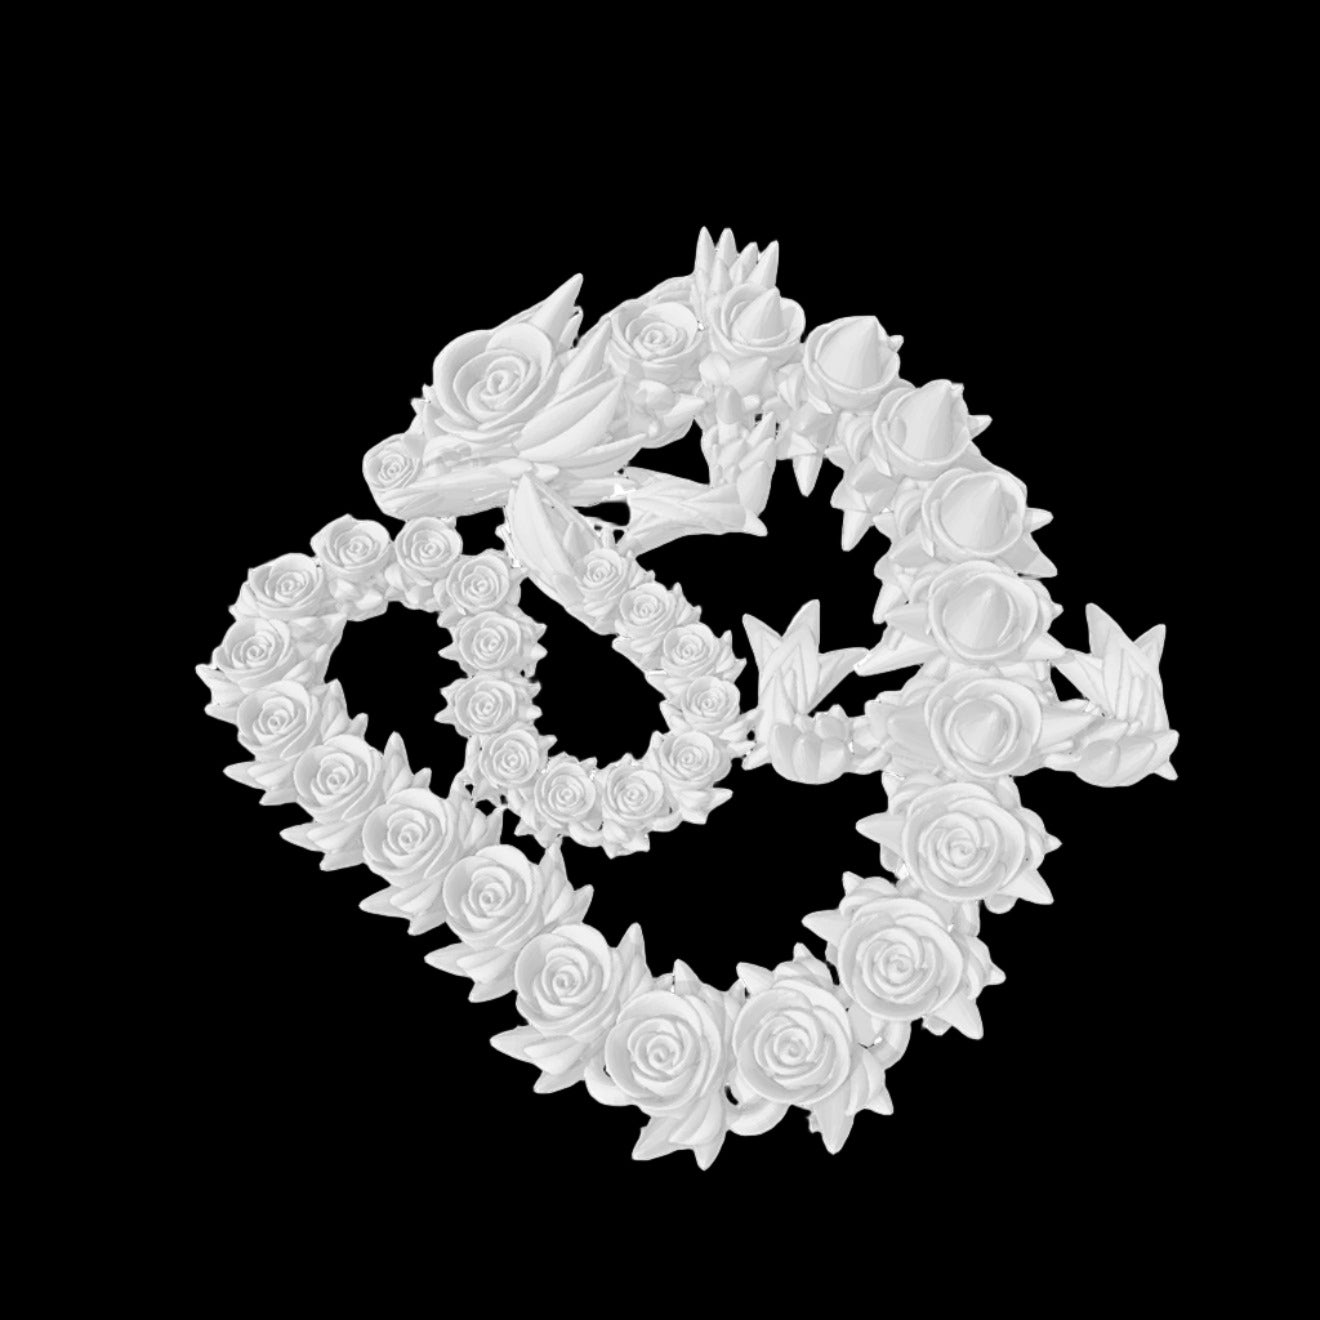 white dragon decorated roses leafs flexible articulated joints cinderwing3d personalisable customizable gift ornament desk toy adhd fidget